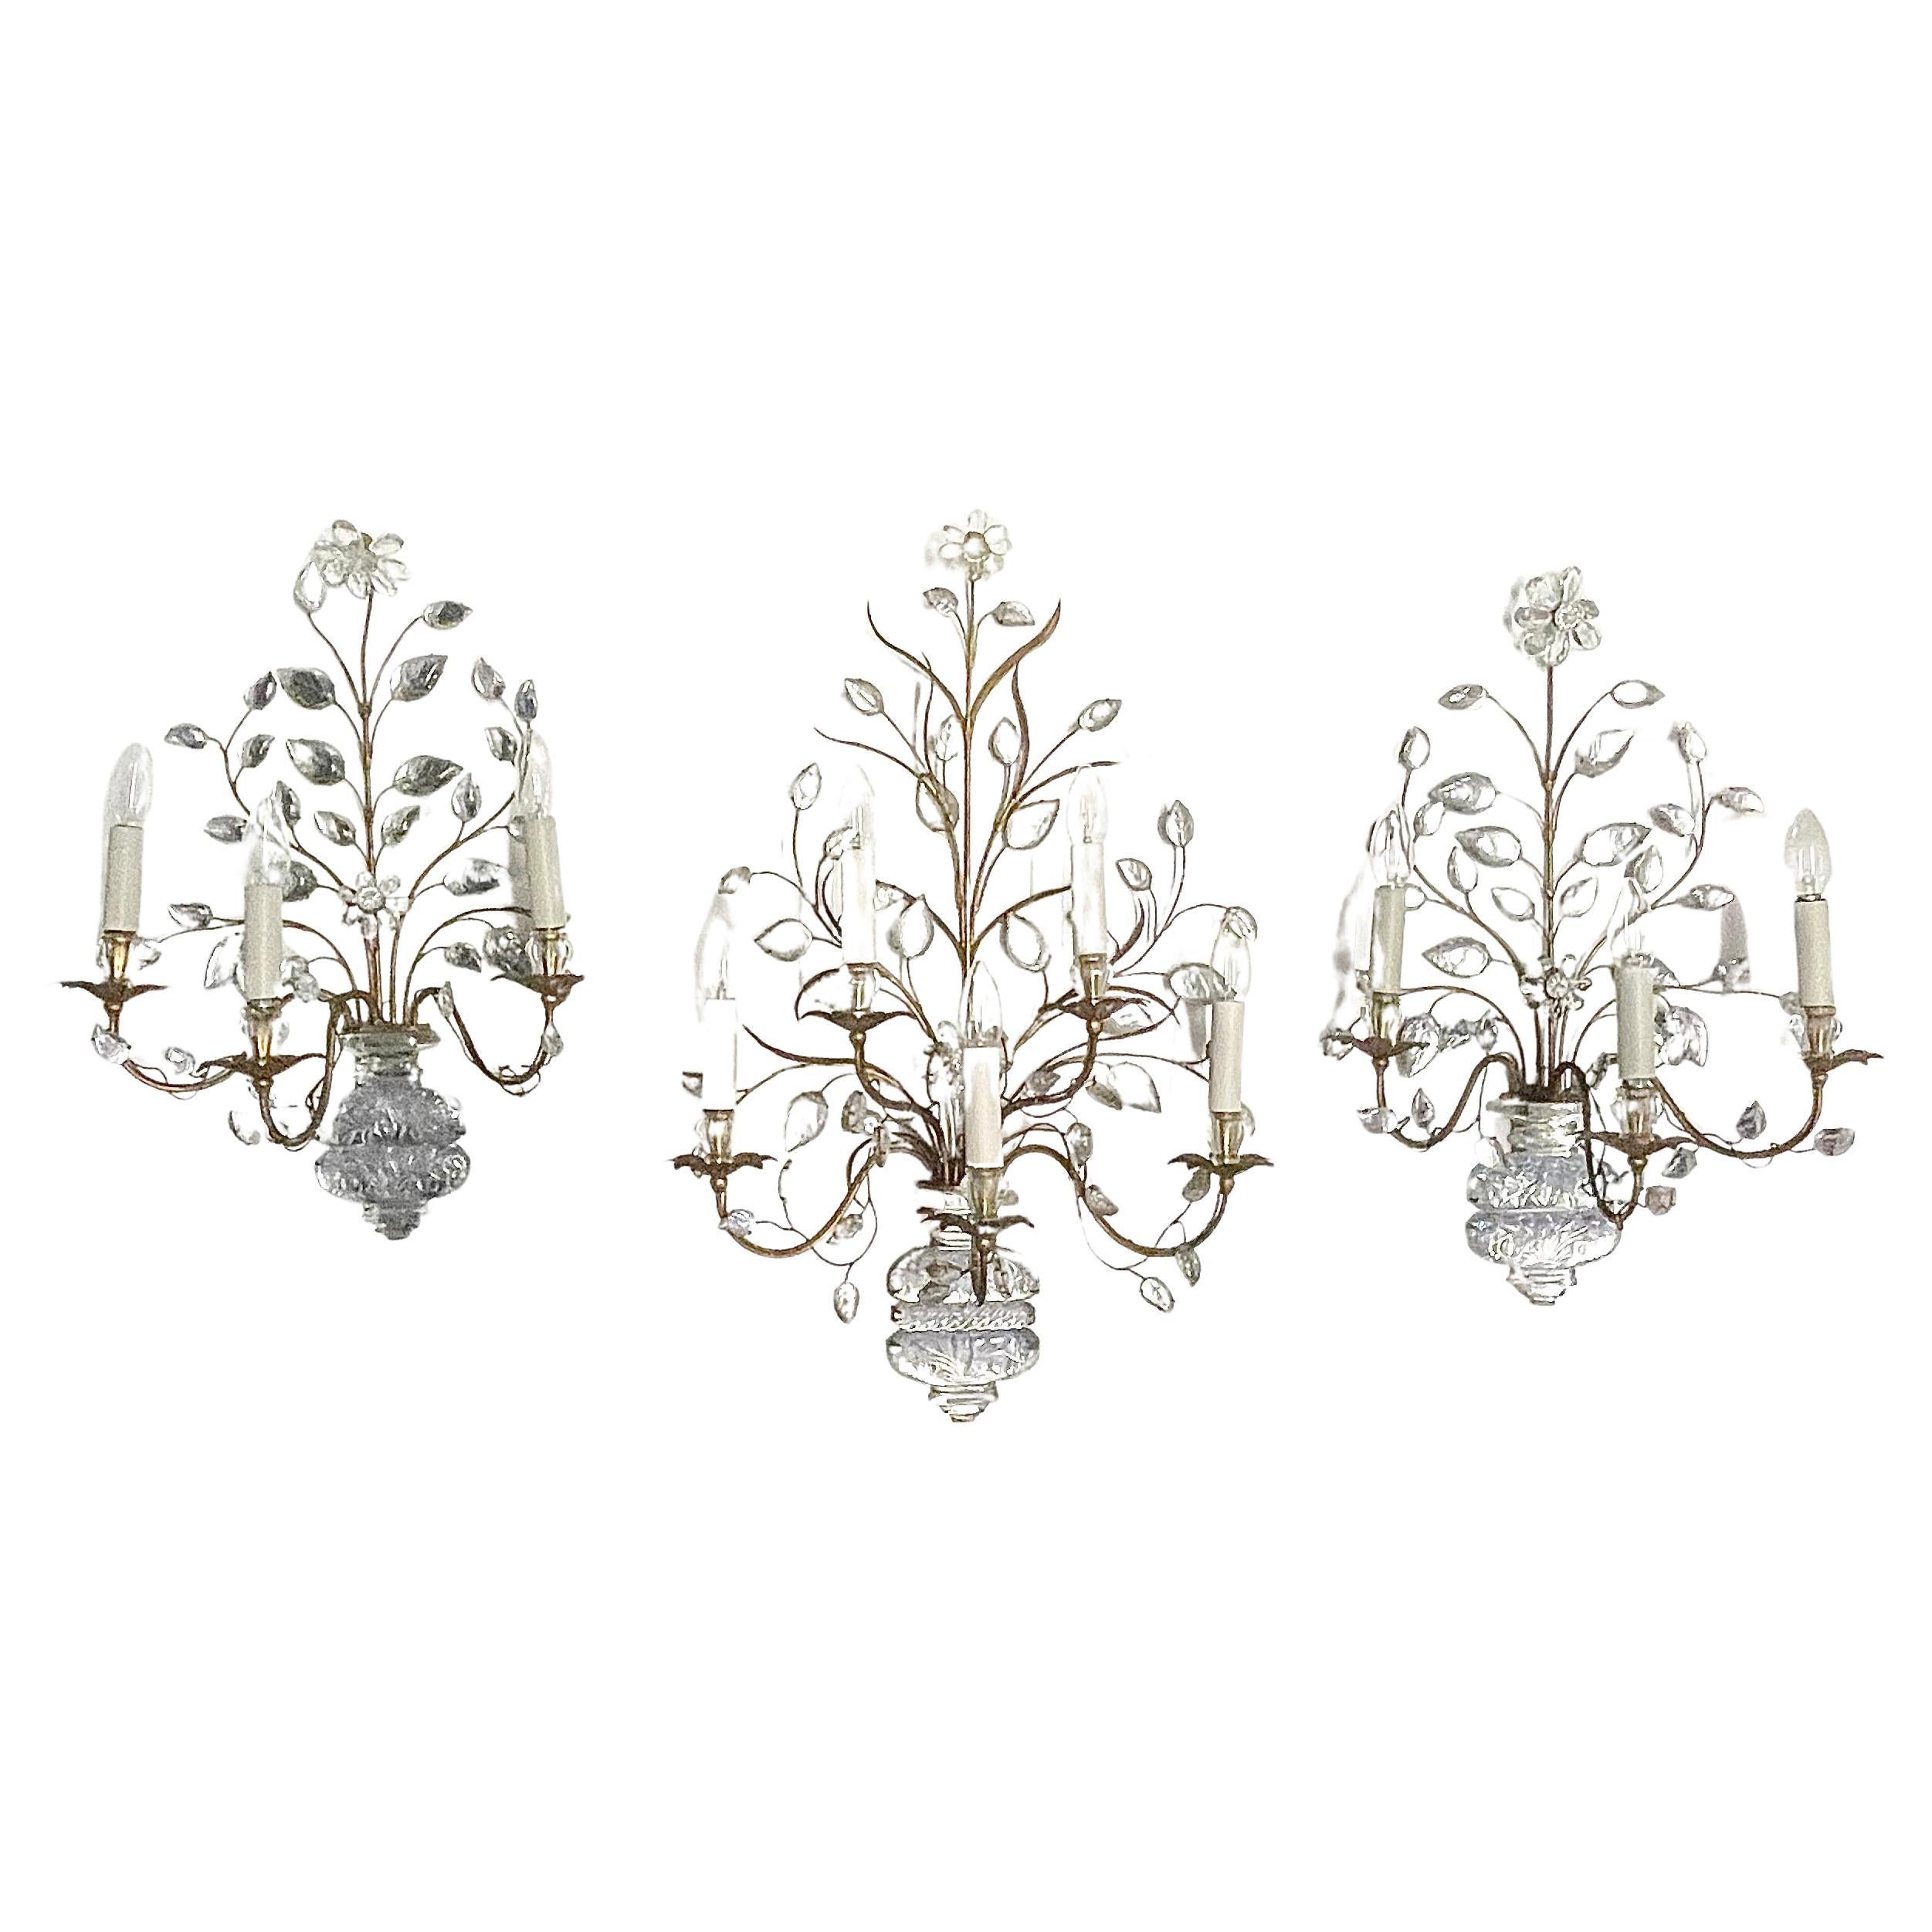 French Rare Set of Three Large Wall Sconces by Maison Baguès, Paris, circa 1930s For Sale